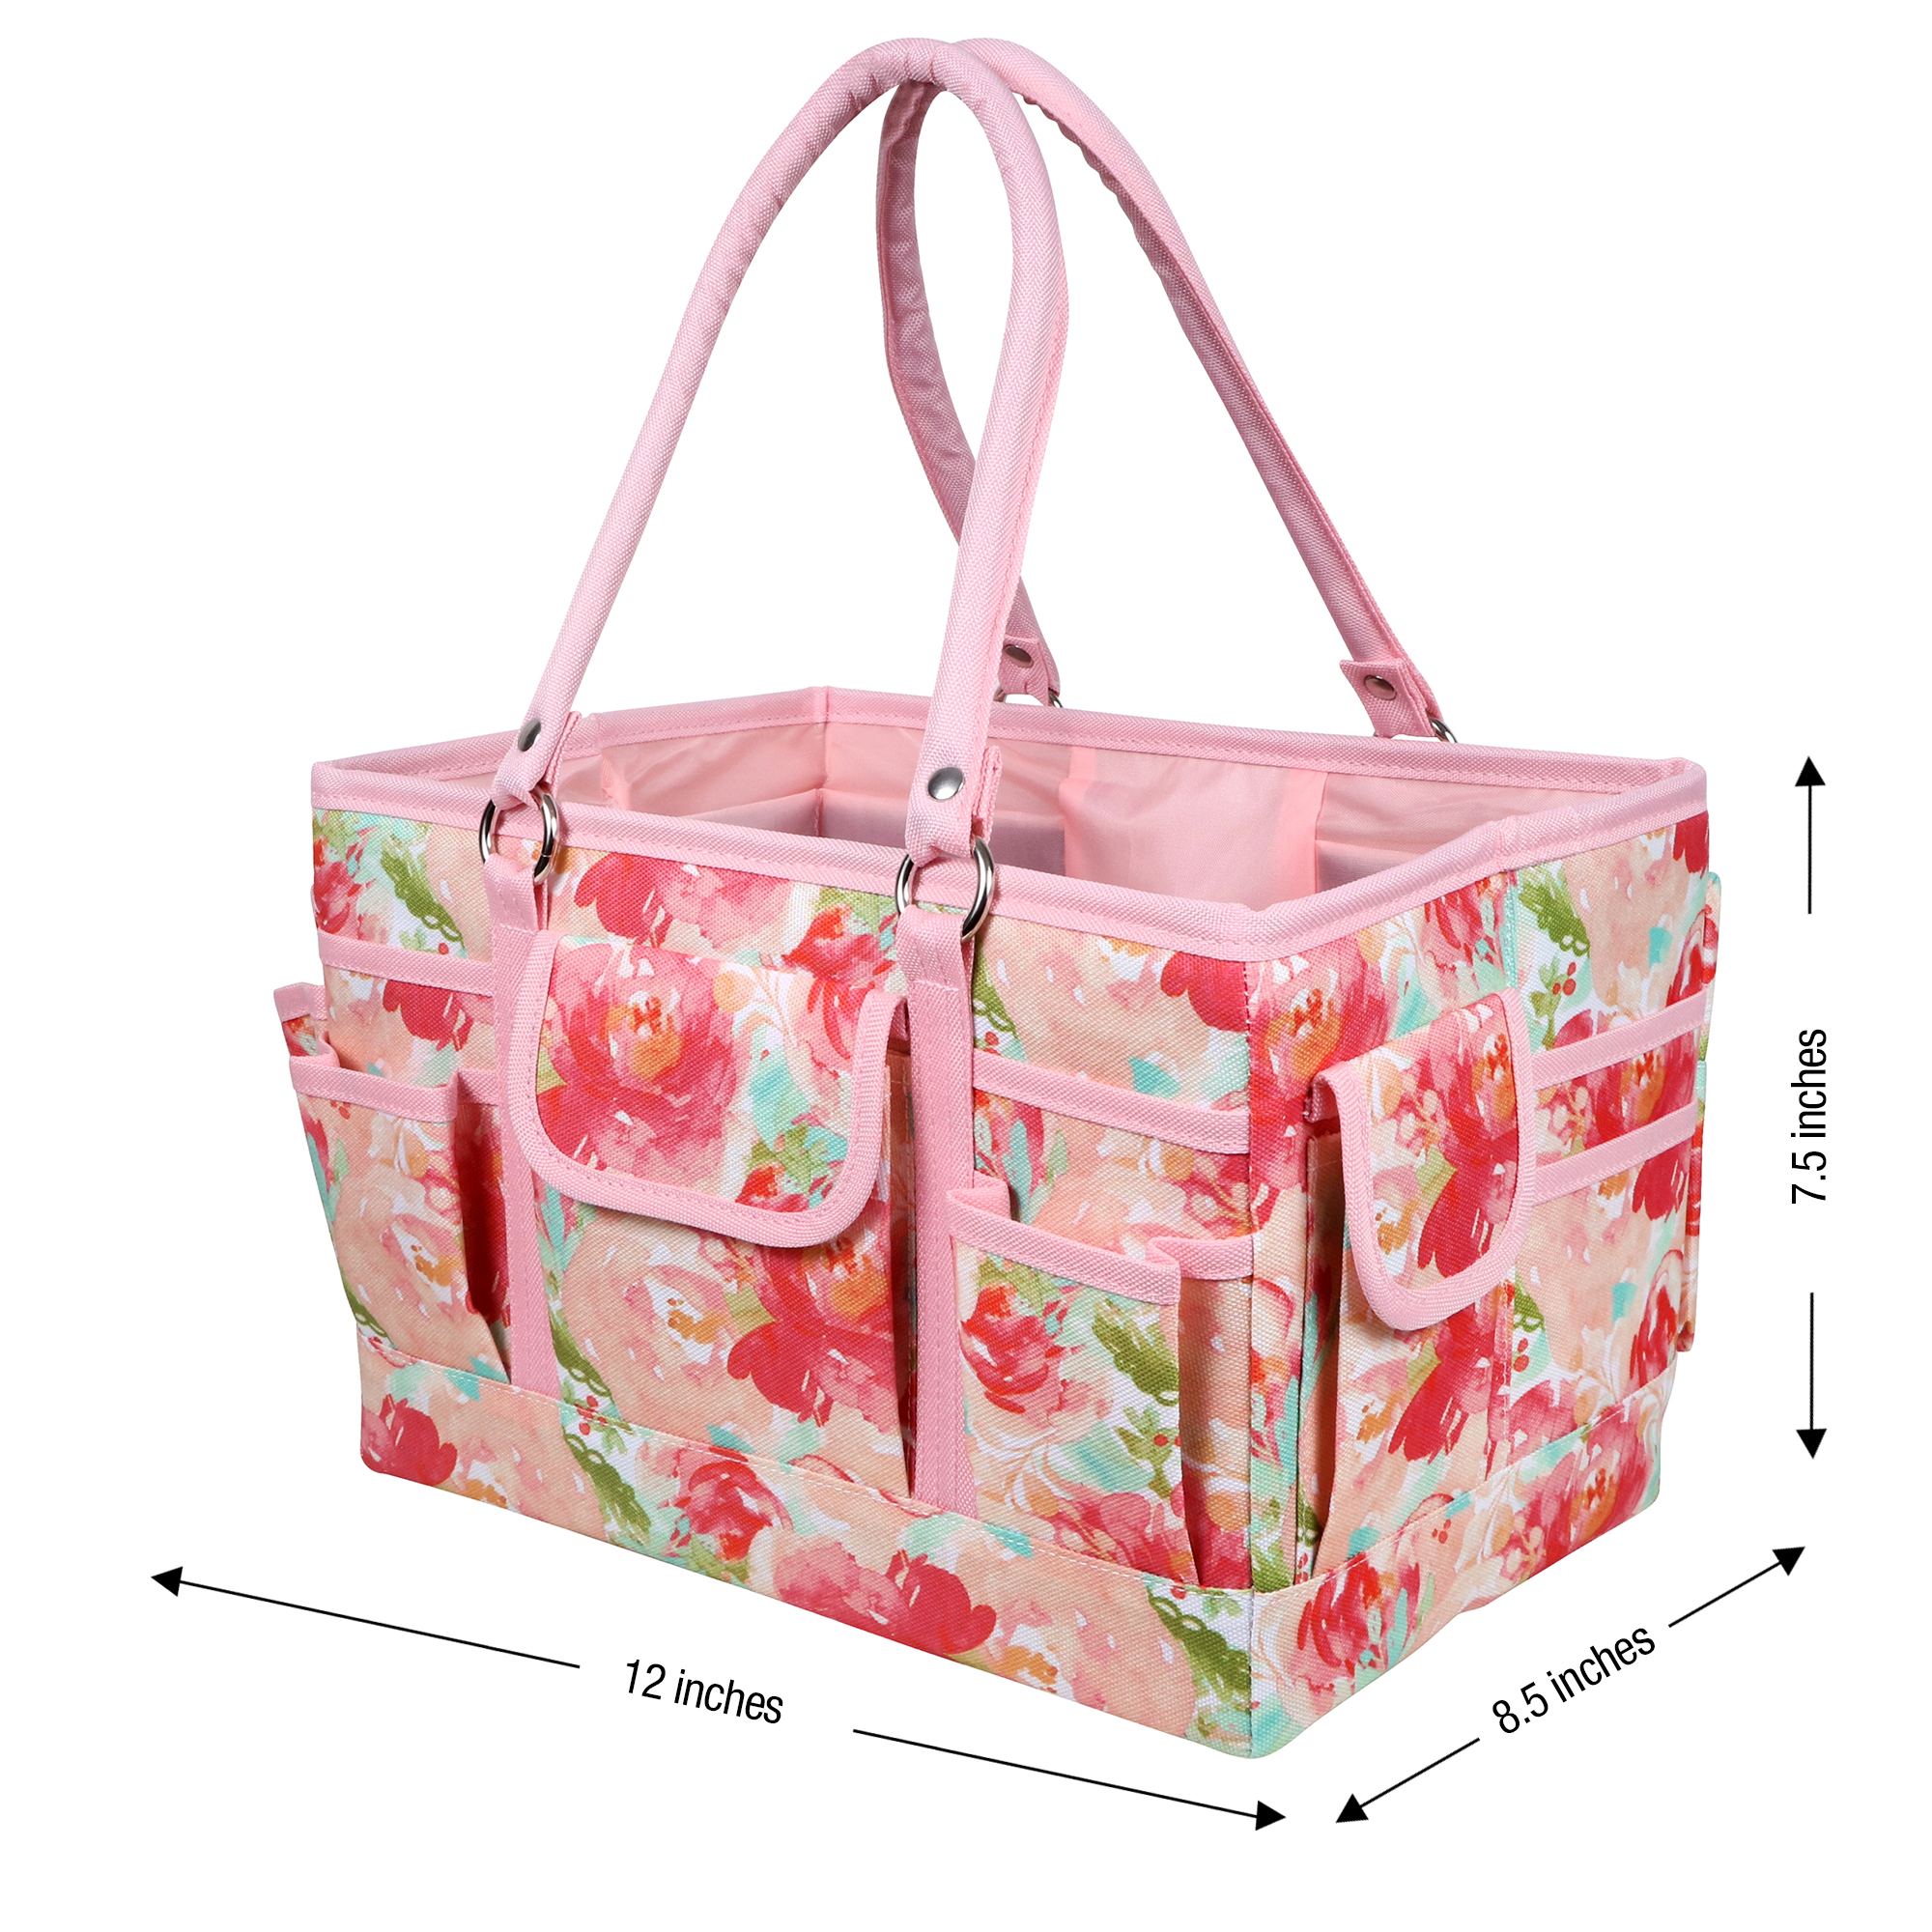 SINGER Sewing Storage Organizer Collapsible Tote Caddy, Craft Storage, Watercolor Floral Print, 1 Count - image 2 of 13